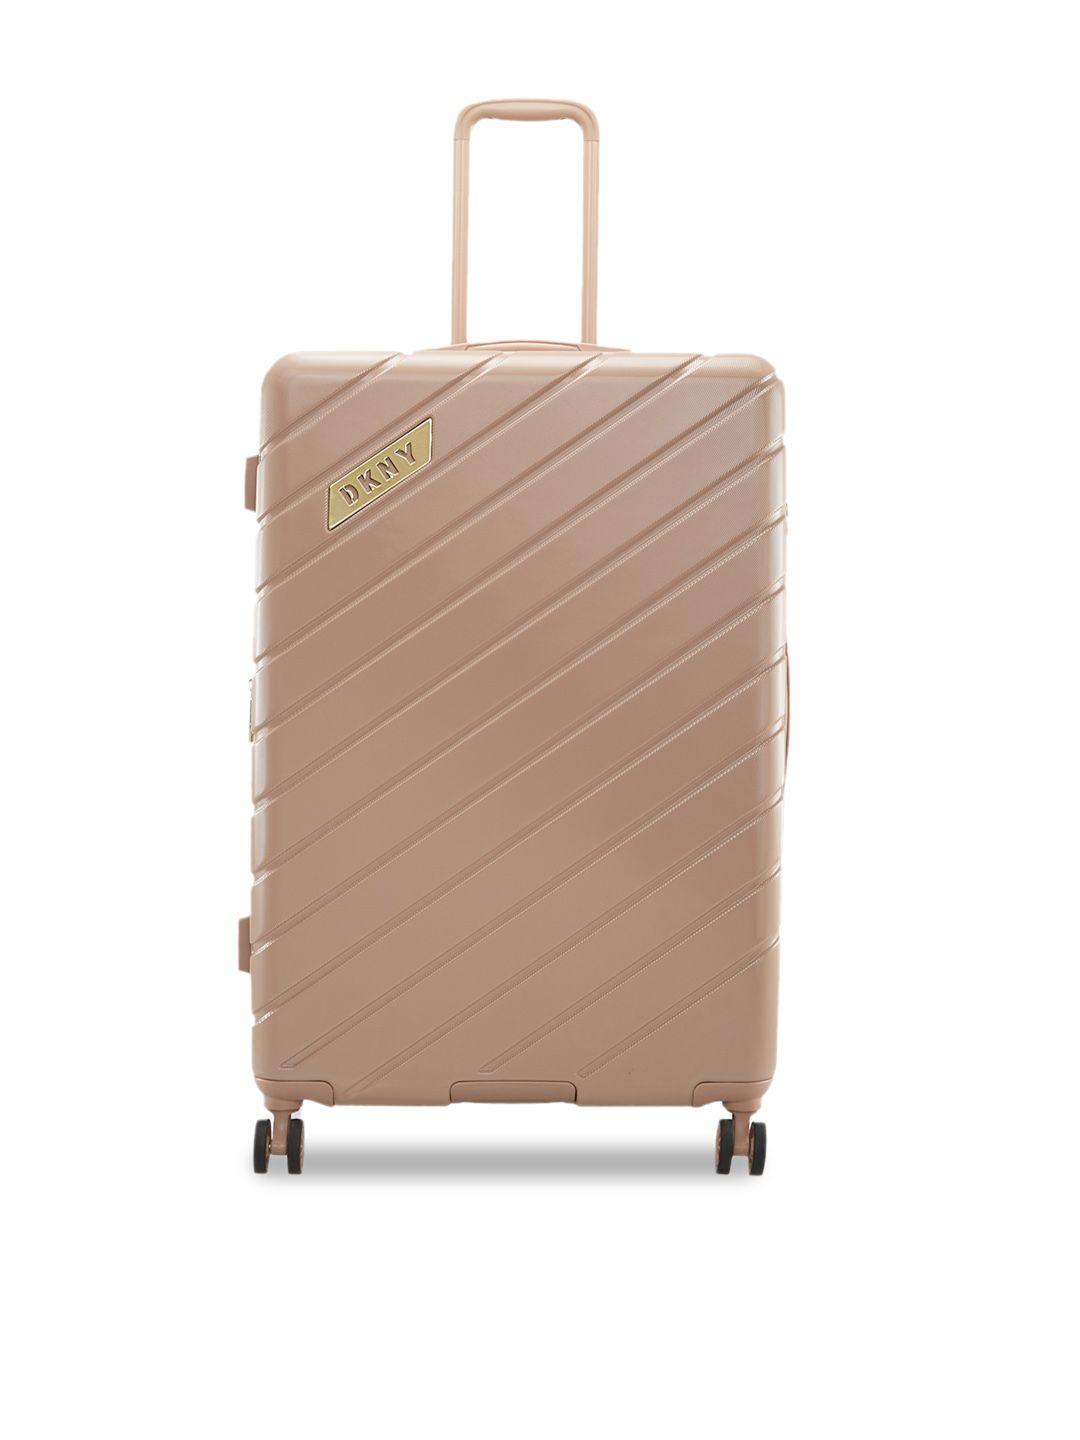 dkny bias textured hard-sided large trolley suitcase